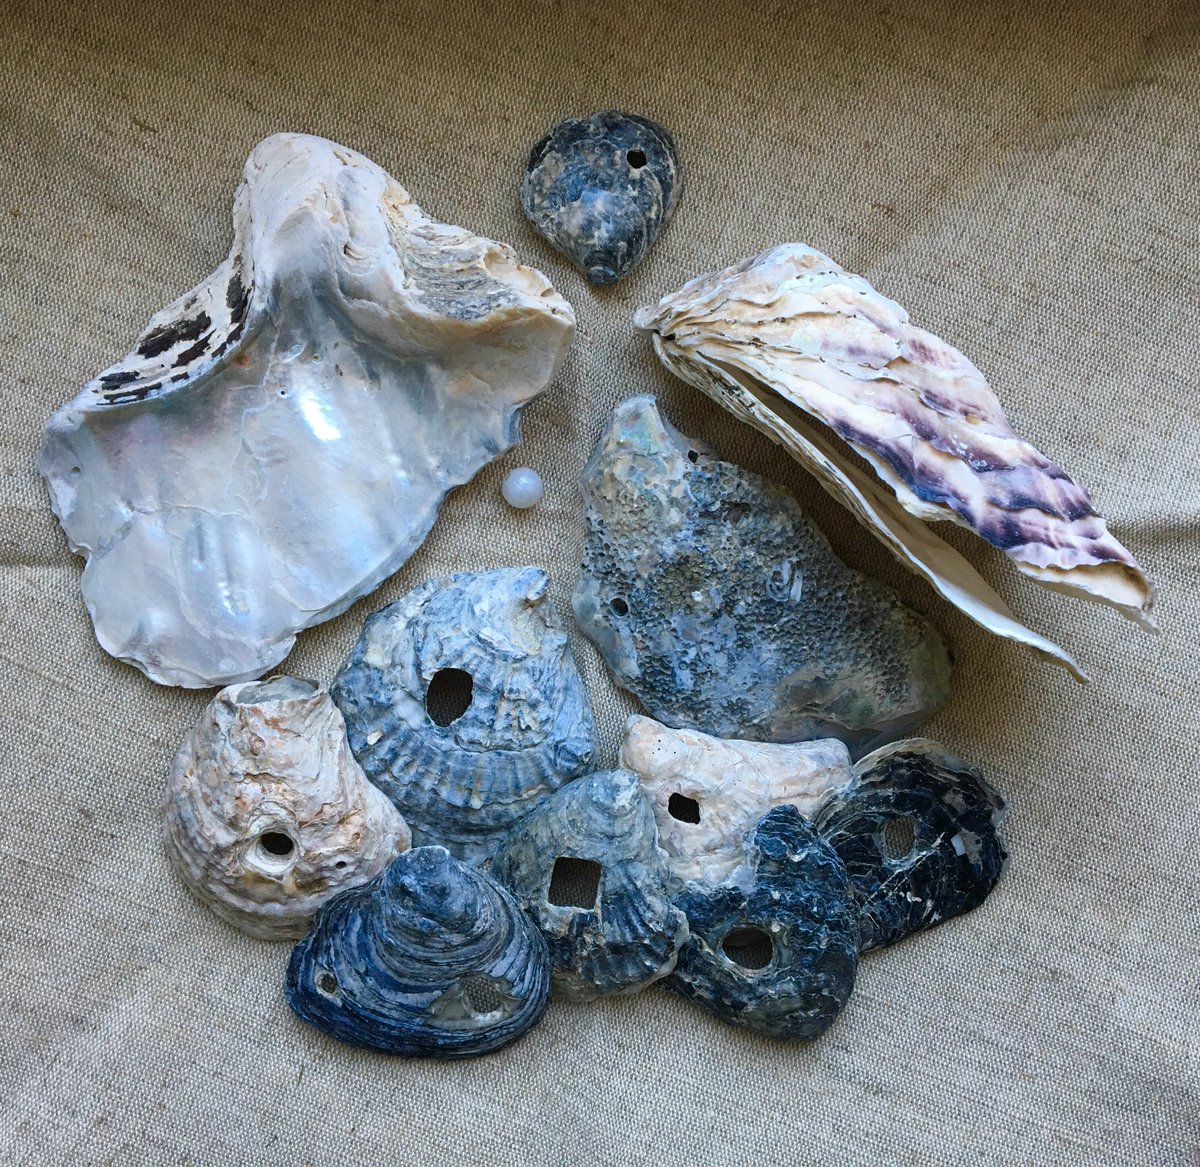 Terrible to read U.K. shellfish industry is collapsing because of Brexit, all those livelihoods gone. Here are some oyster shell finds from the Thames Foreshore, an extremely common food staple for millennia. Roman elites particularly prized the British oyster for its quality.